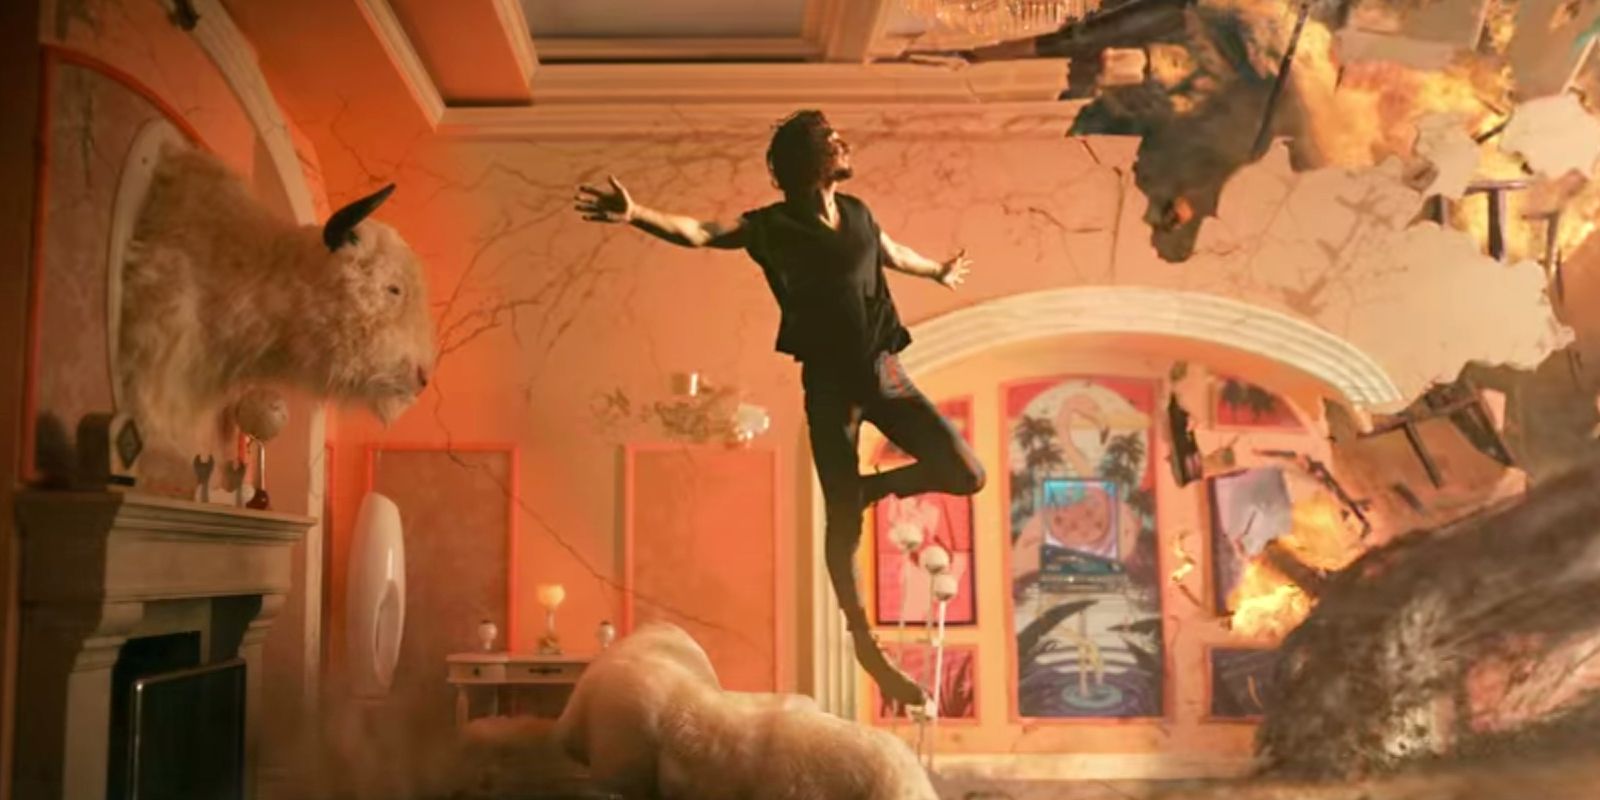 Klaus Hargreeves jumping at the white buffalo in The Umbrella Academy.